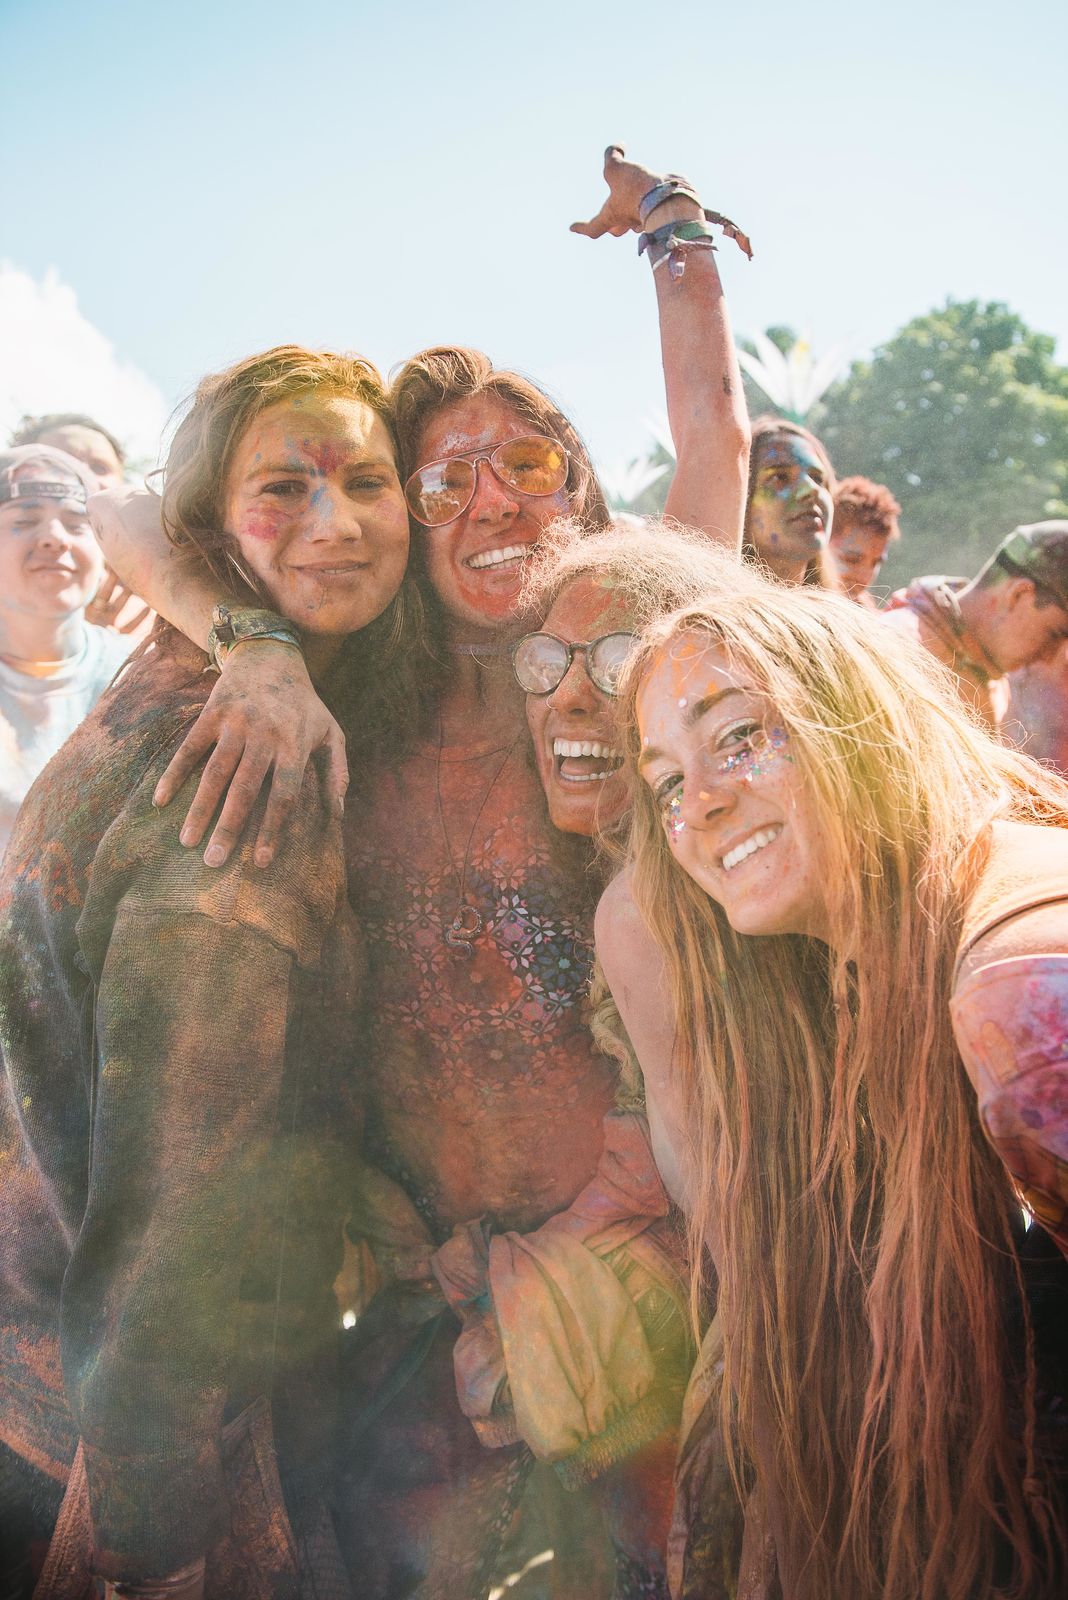 The Final Paint Fight